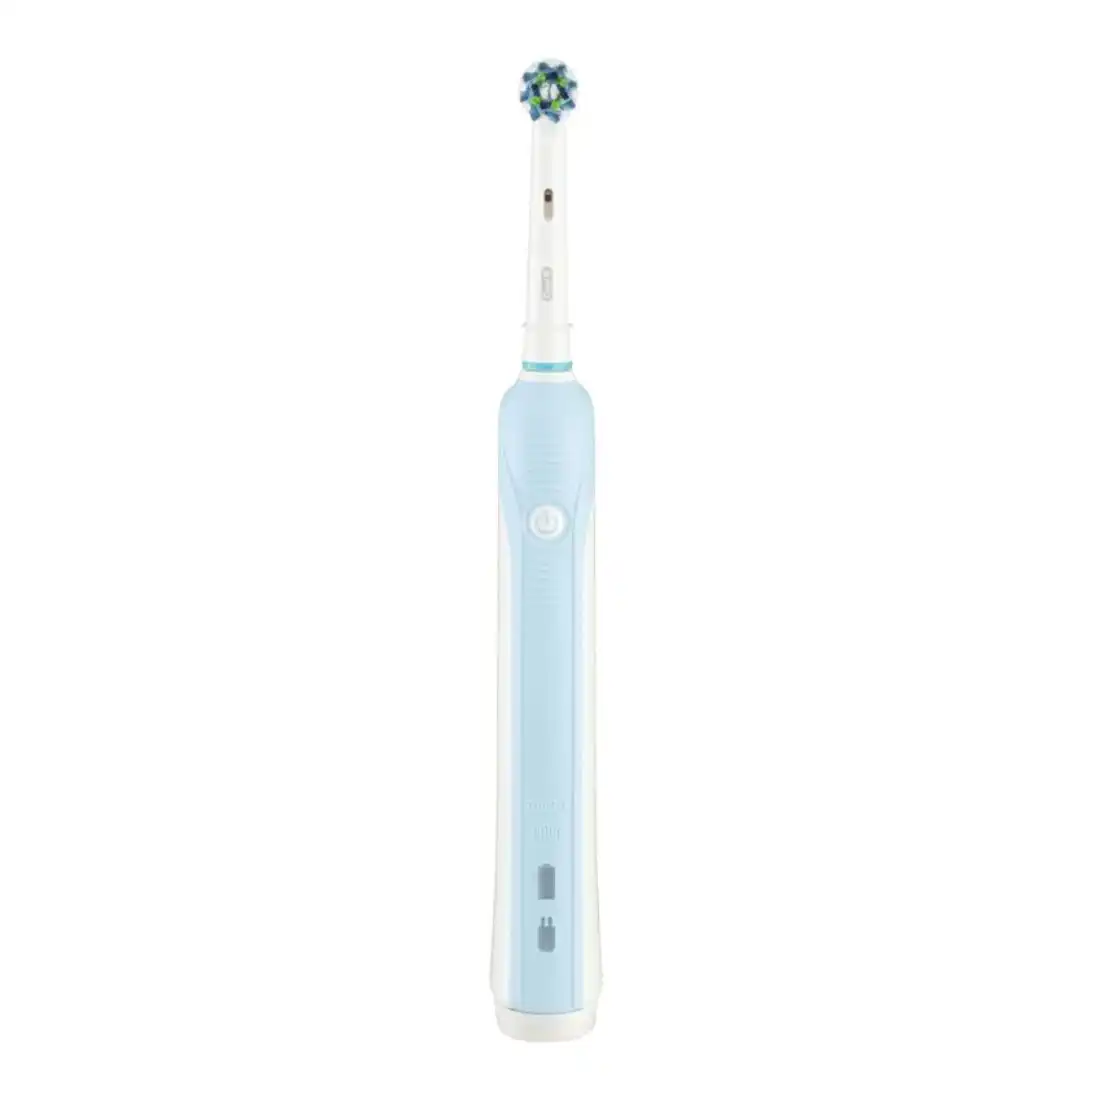 Oral-B Pro 500 Electric Toothbrush W/ Travel Case - Blue